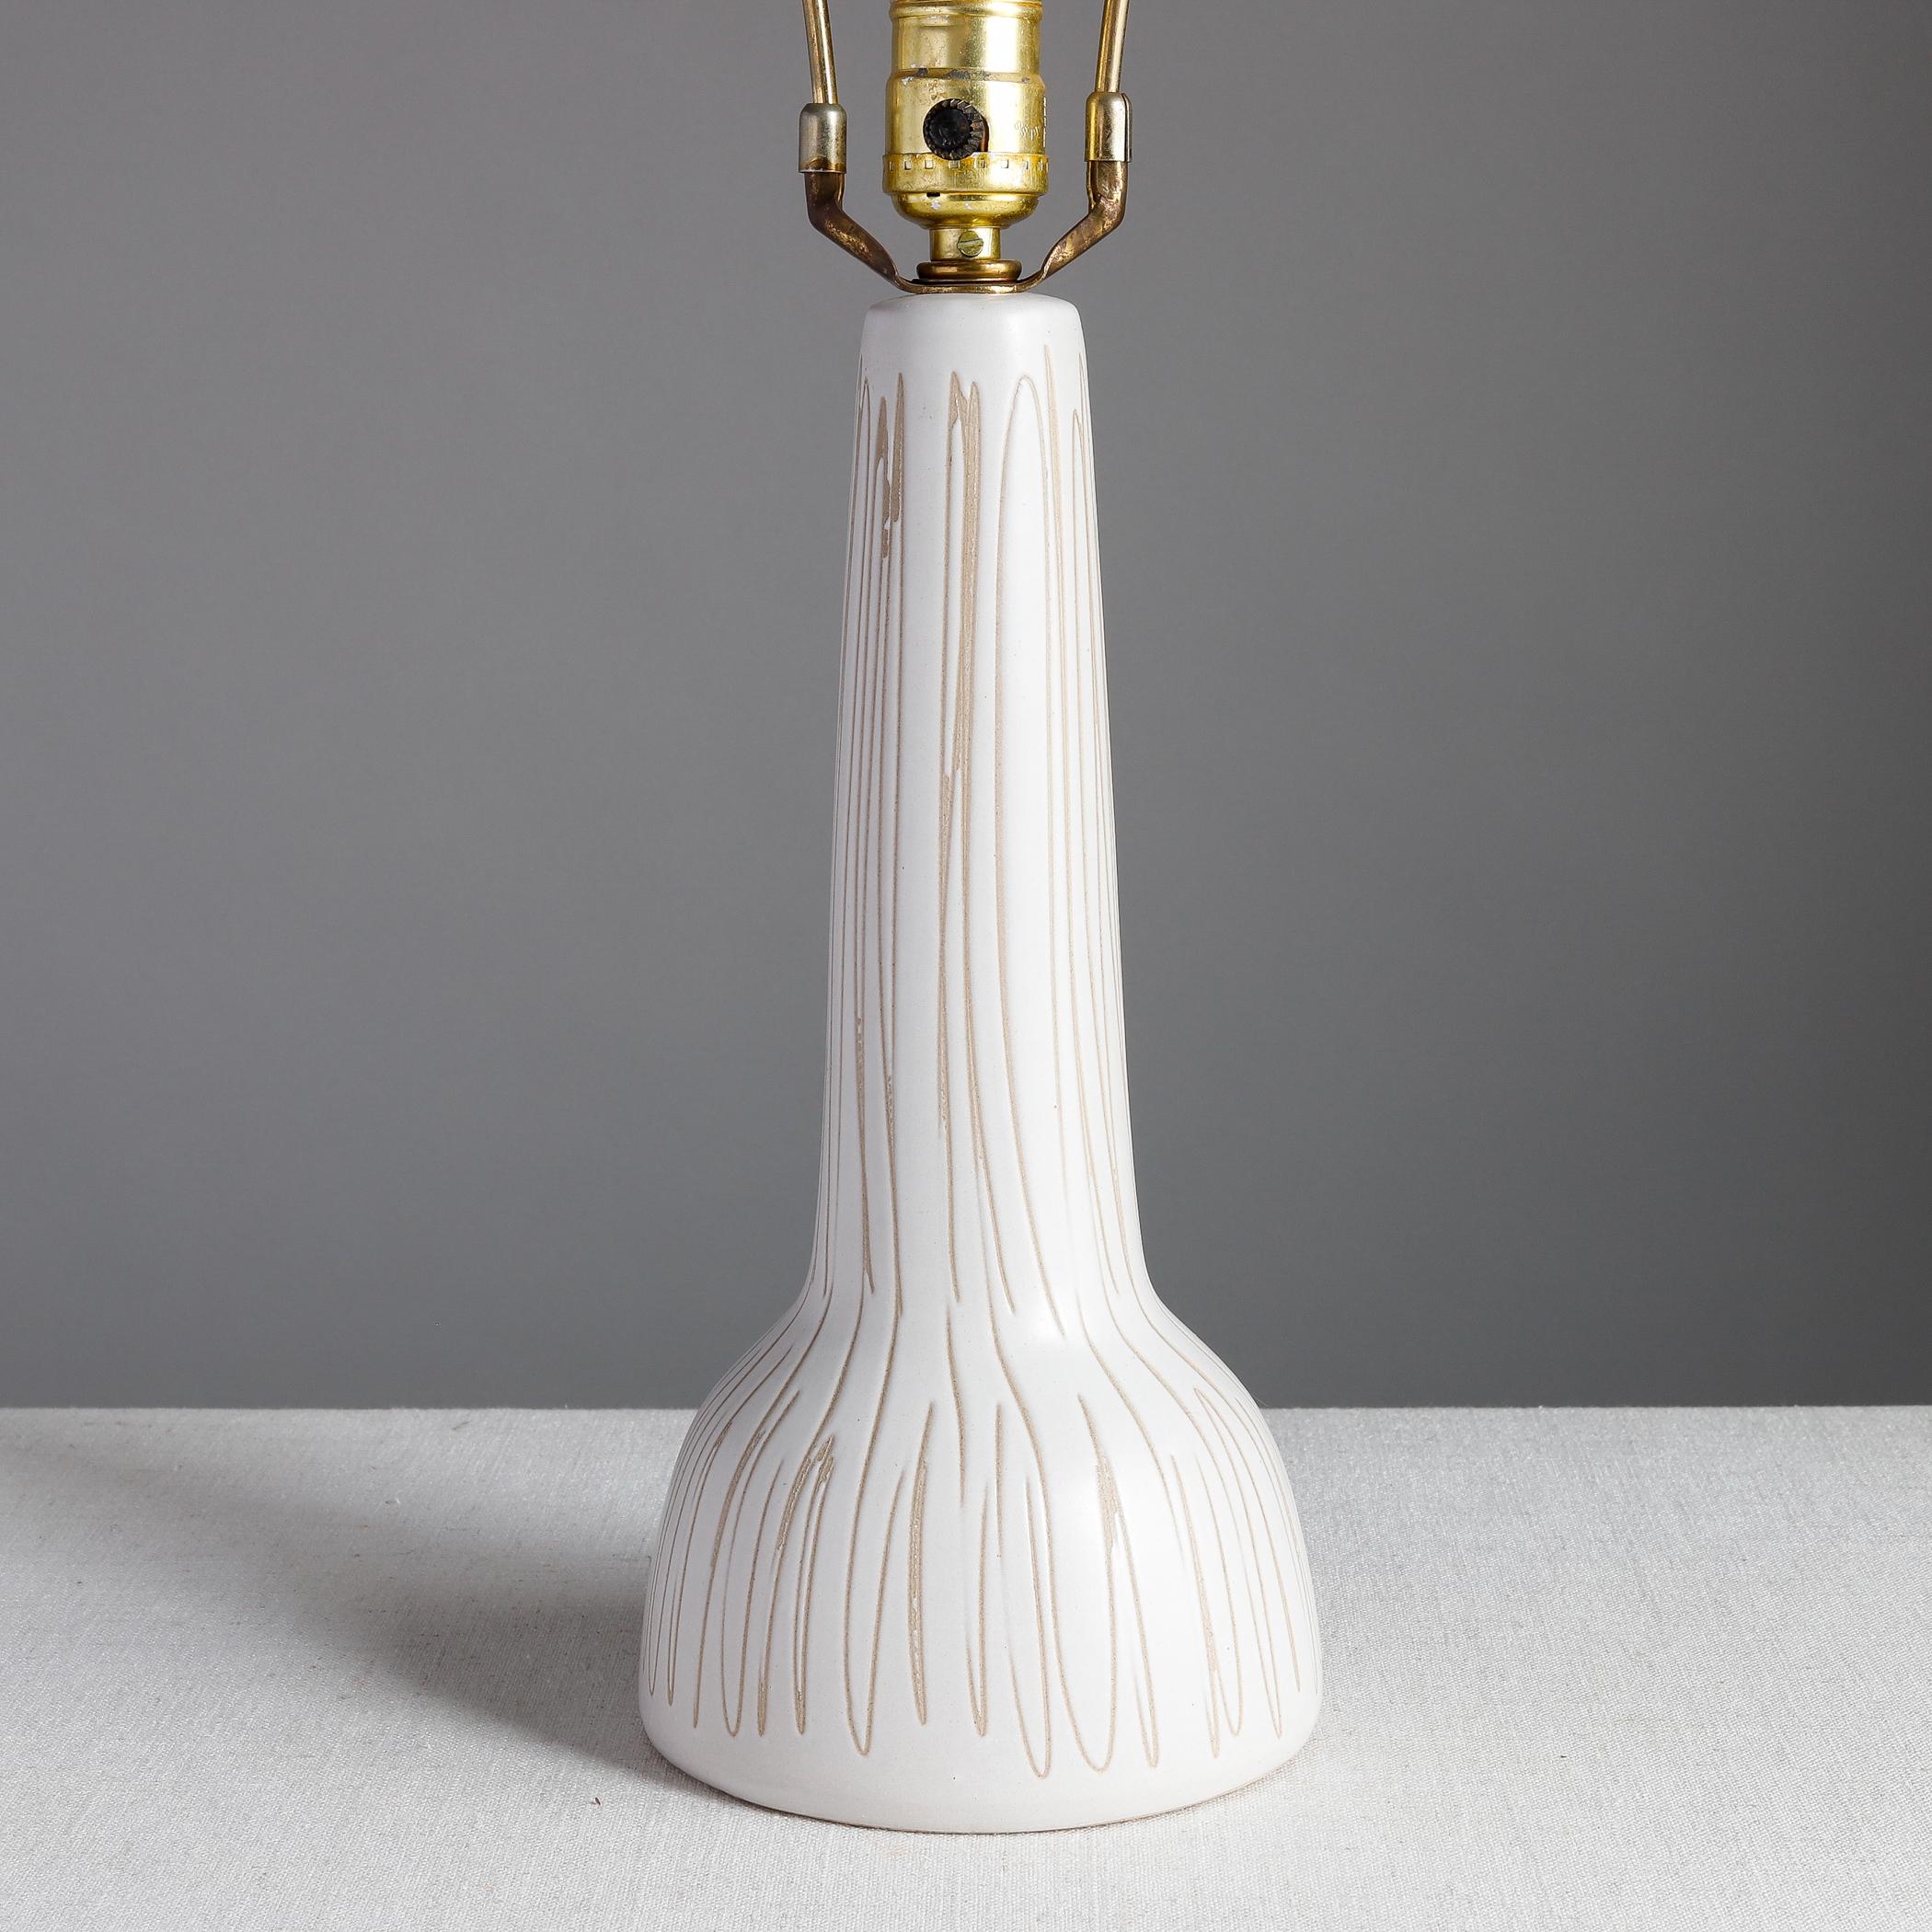 Midcentury ceramic table lamp designed by Jane and Gordon Martz for Marshall Studios of Veedersburg, Indiana. The stoneware body has a warm white glaze with hand-incised vertical lines. Signed at the back near the cord hole and with Marshall Studios